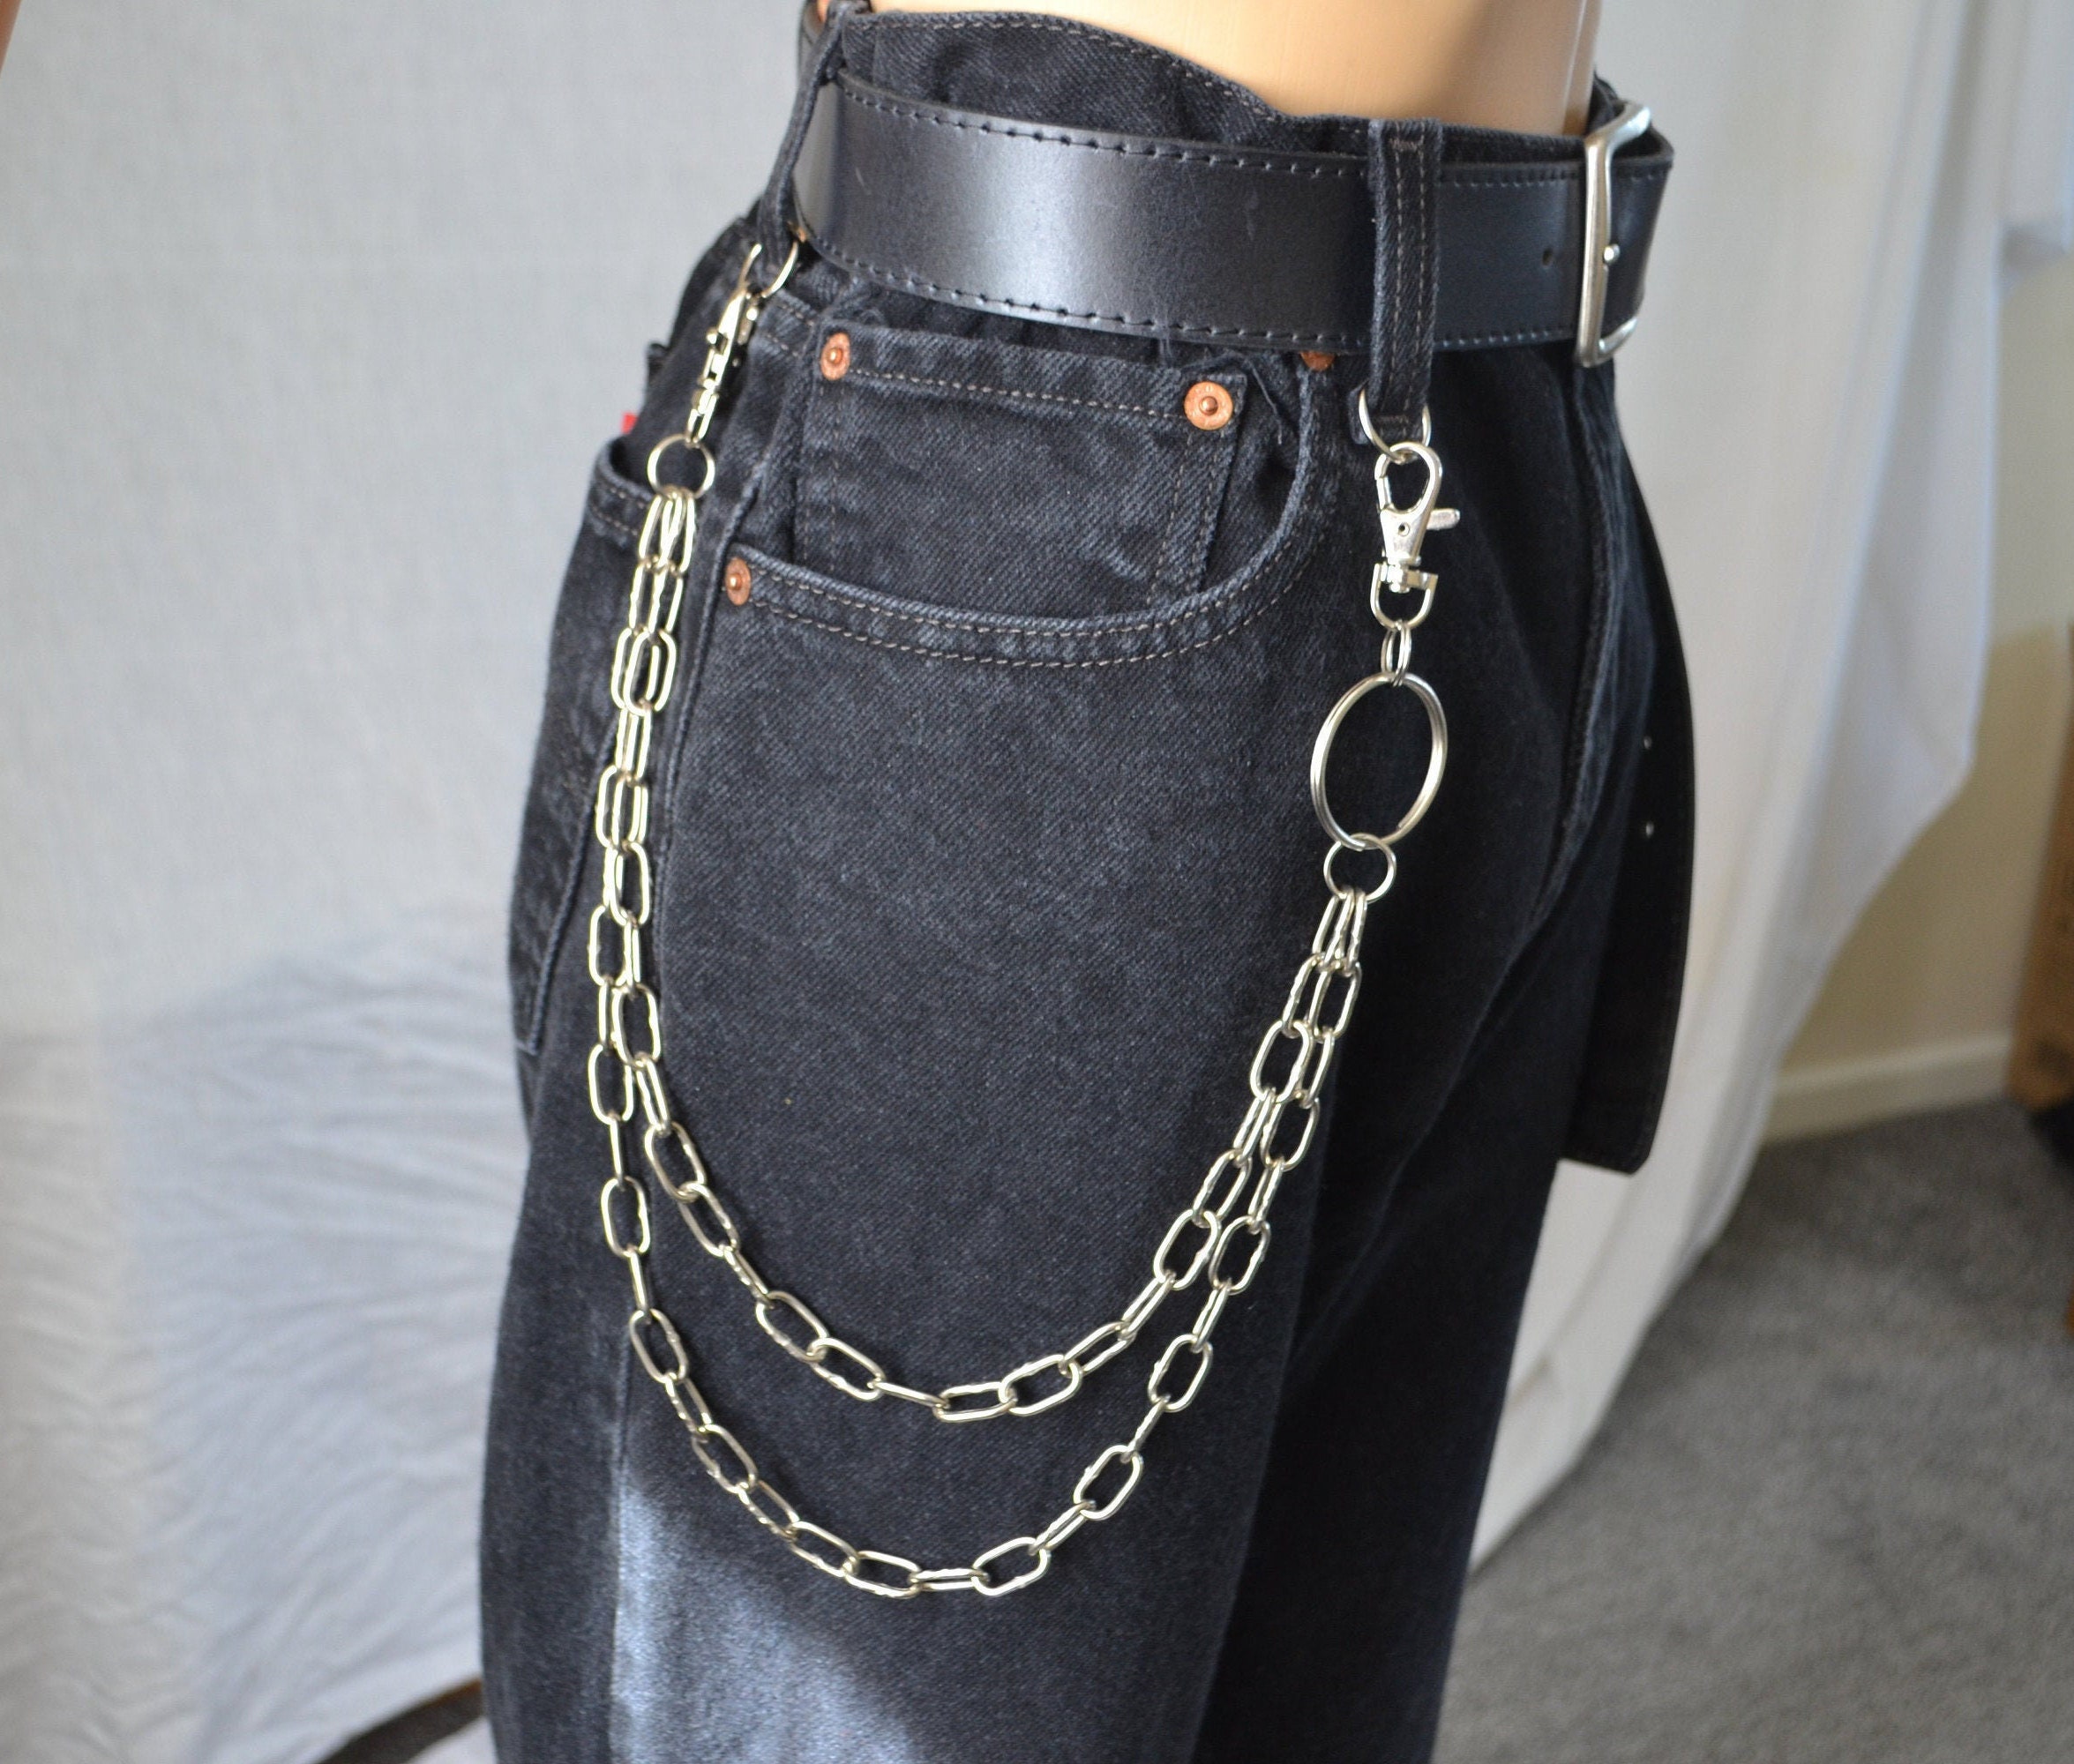 2-row Gunmetal Trouser Chains, Pocket Chain, Stainless Steel Trouser Chain,  Hipster Chain, Biker Chain, Father's Day Gift 